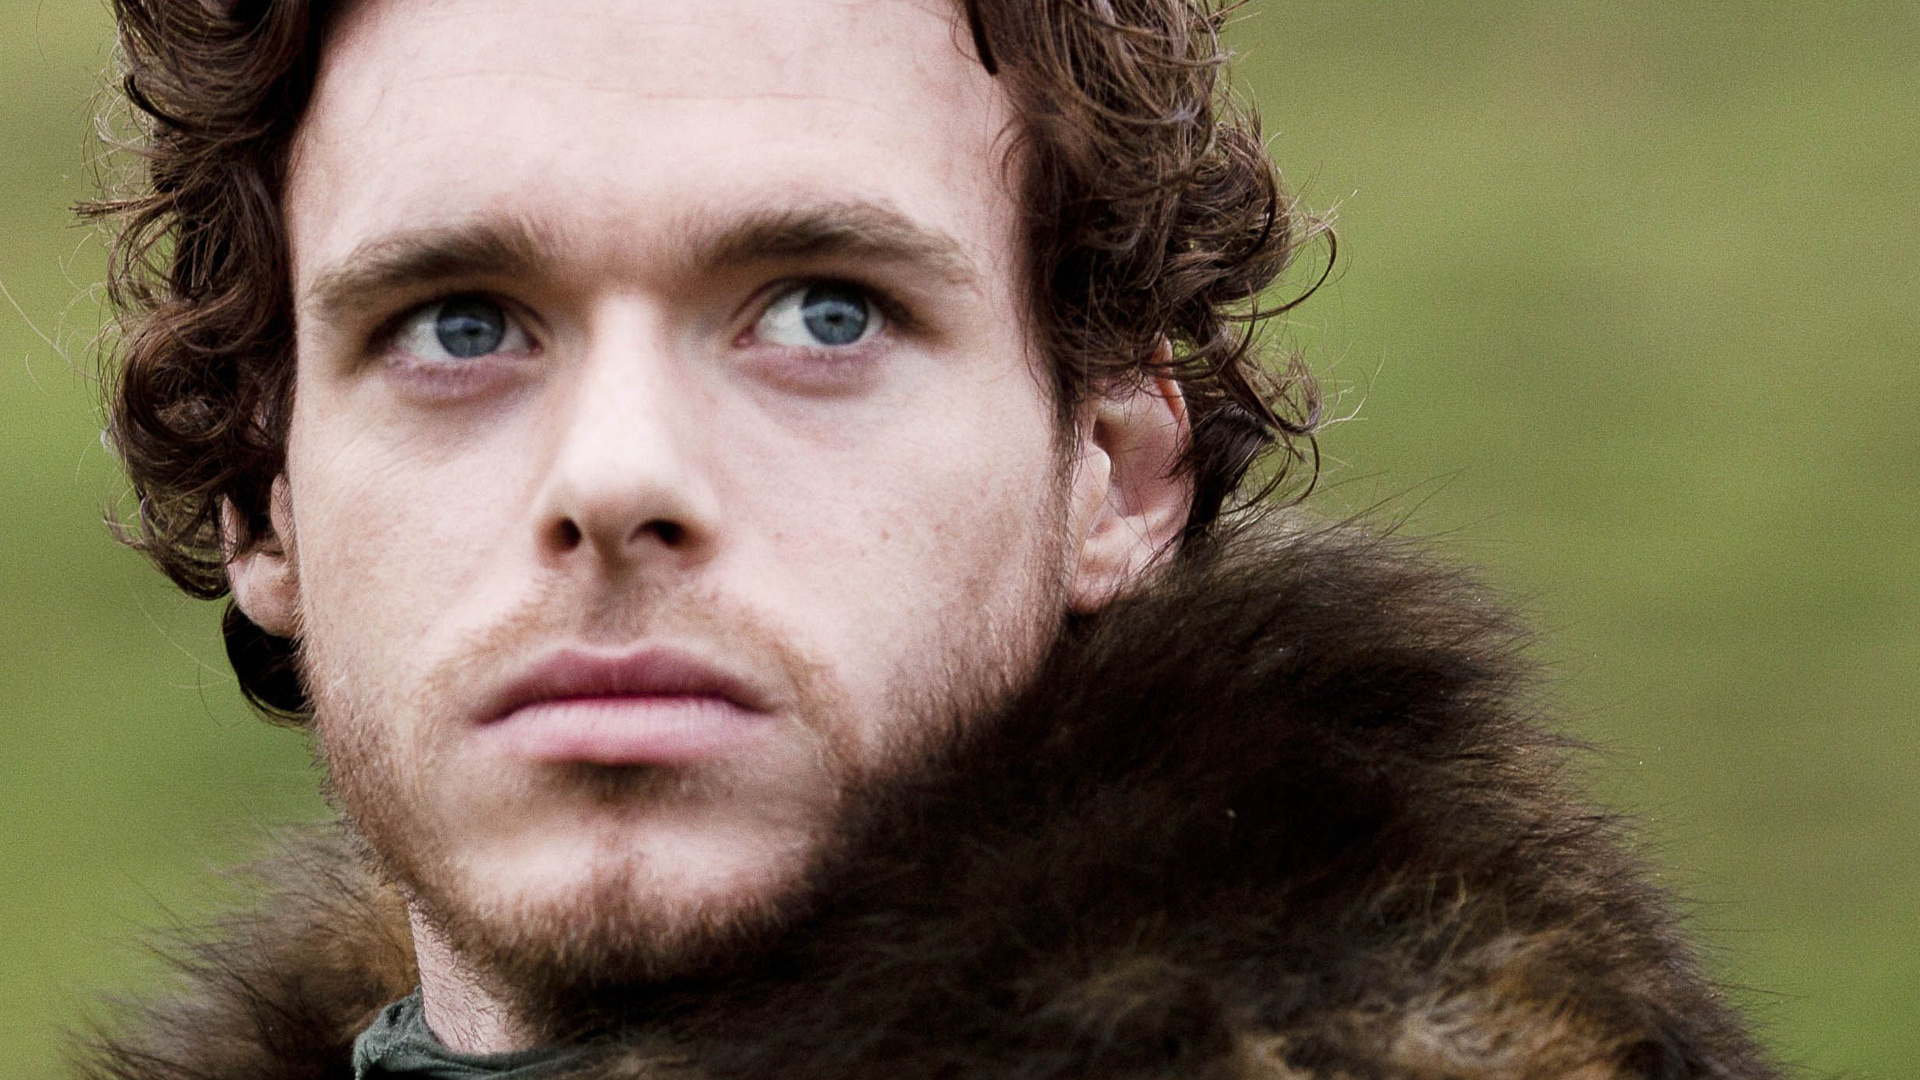 Richard Madden: The oldest legitimate son of Eddard "Ned" Stark and his wife Catelyn. 1920x1080 Full HD Background.